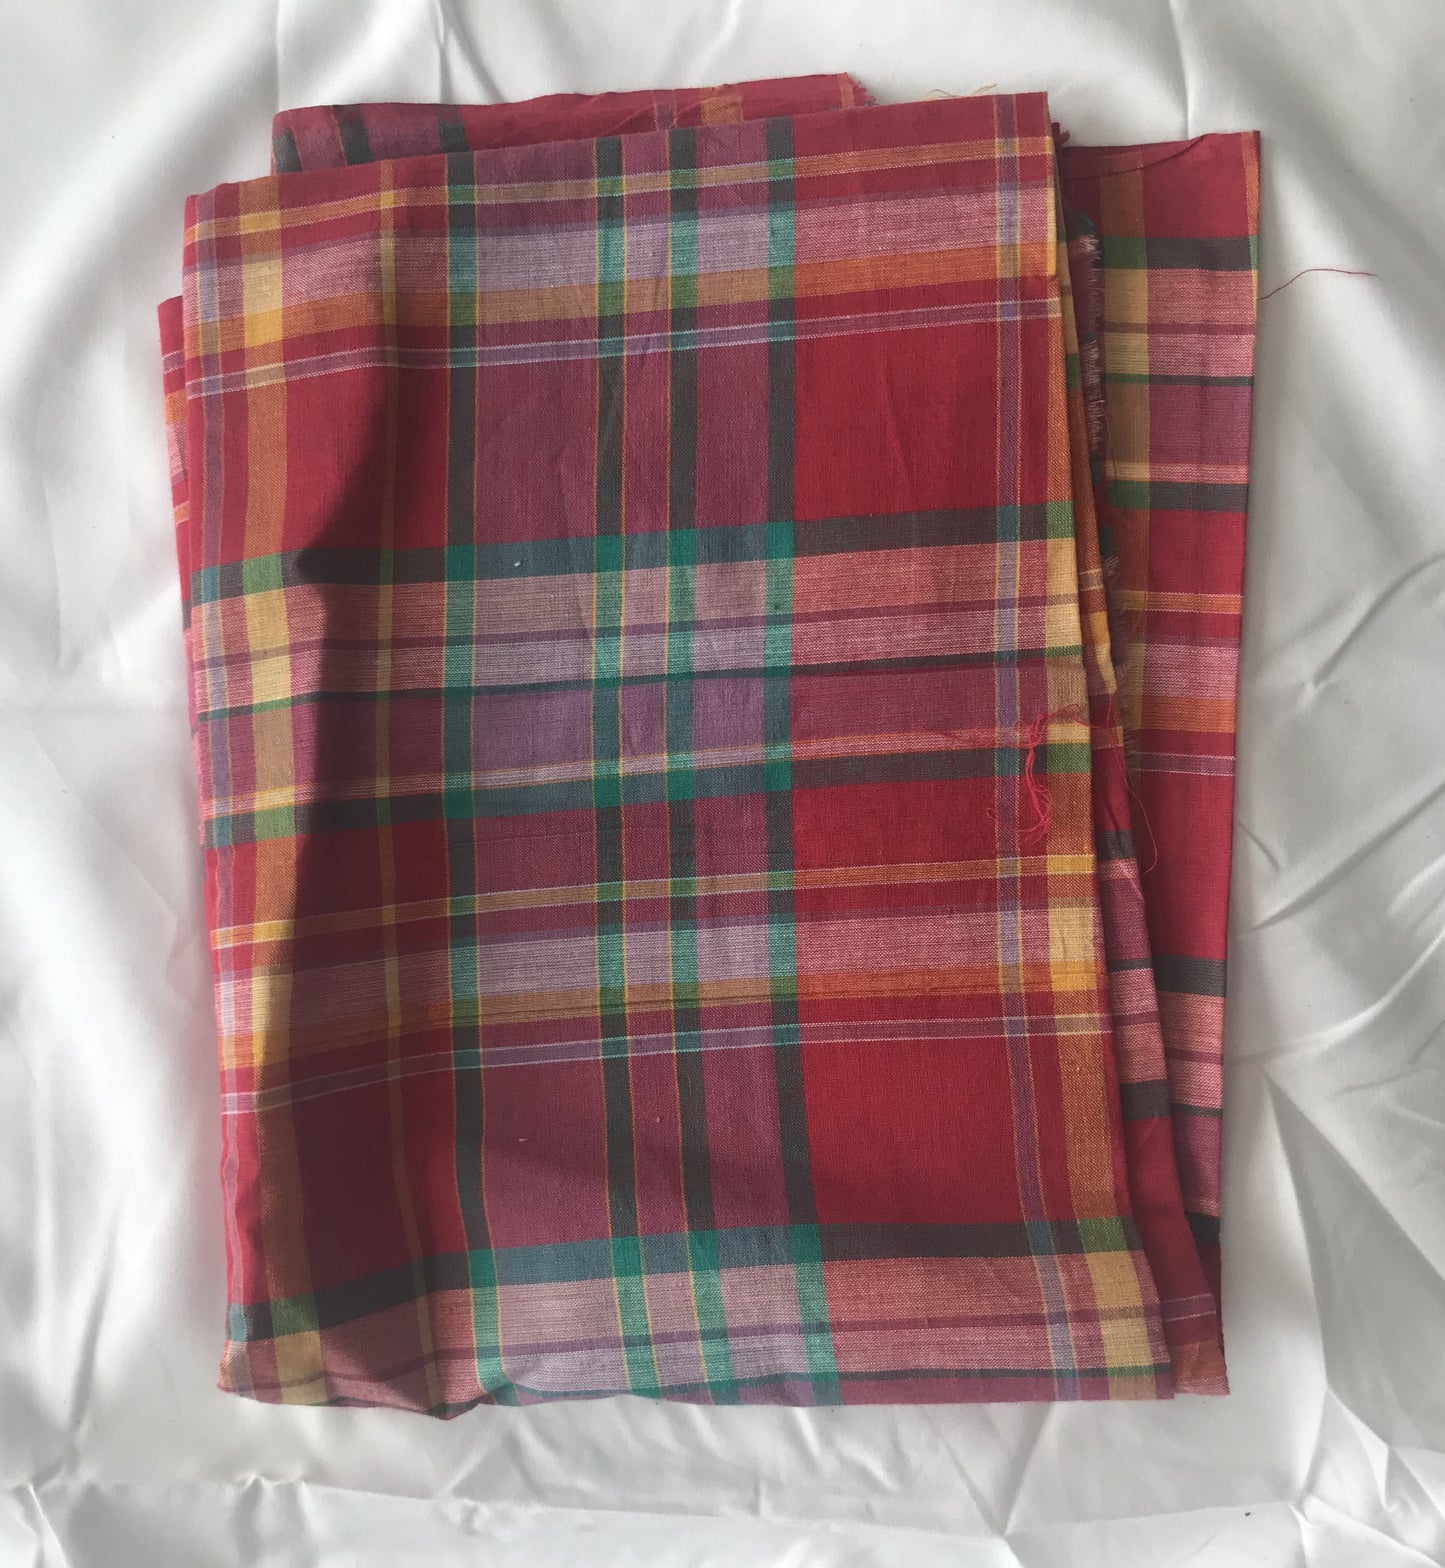 2 yds. Plaid (Red, Yellow, Lavender & Teal) Cotton Fabric